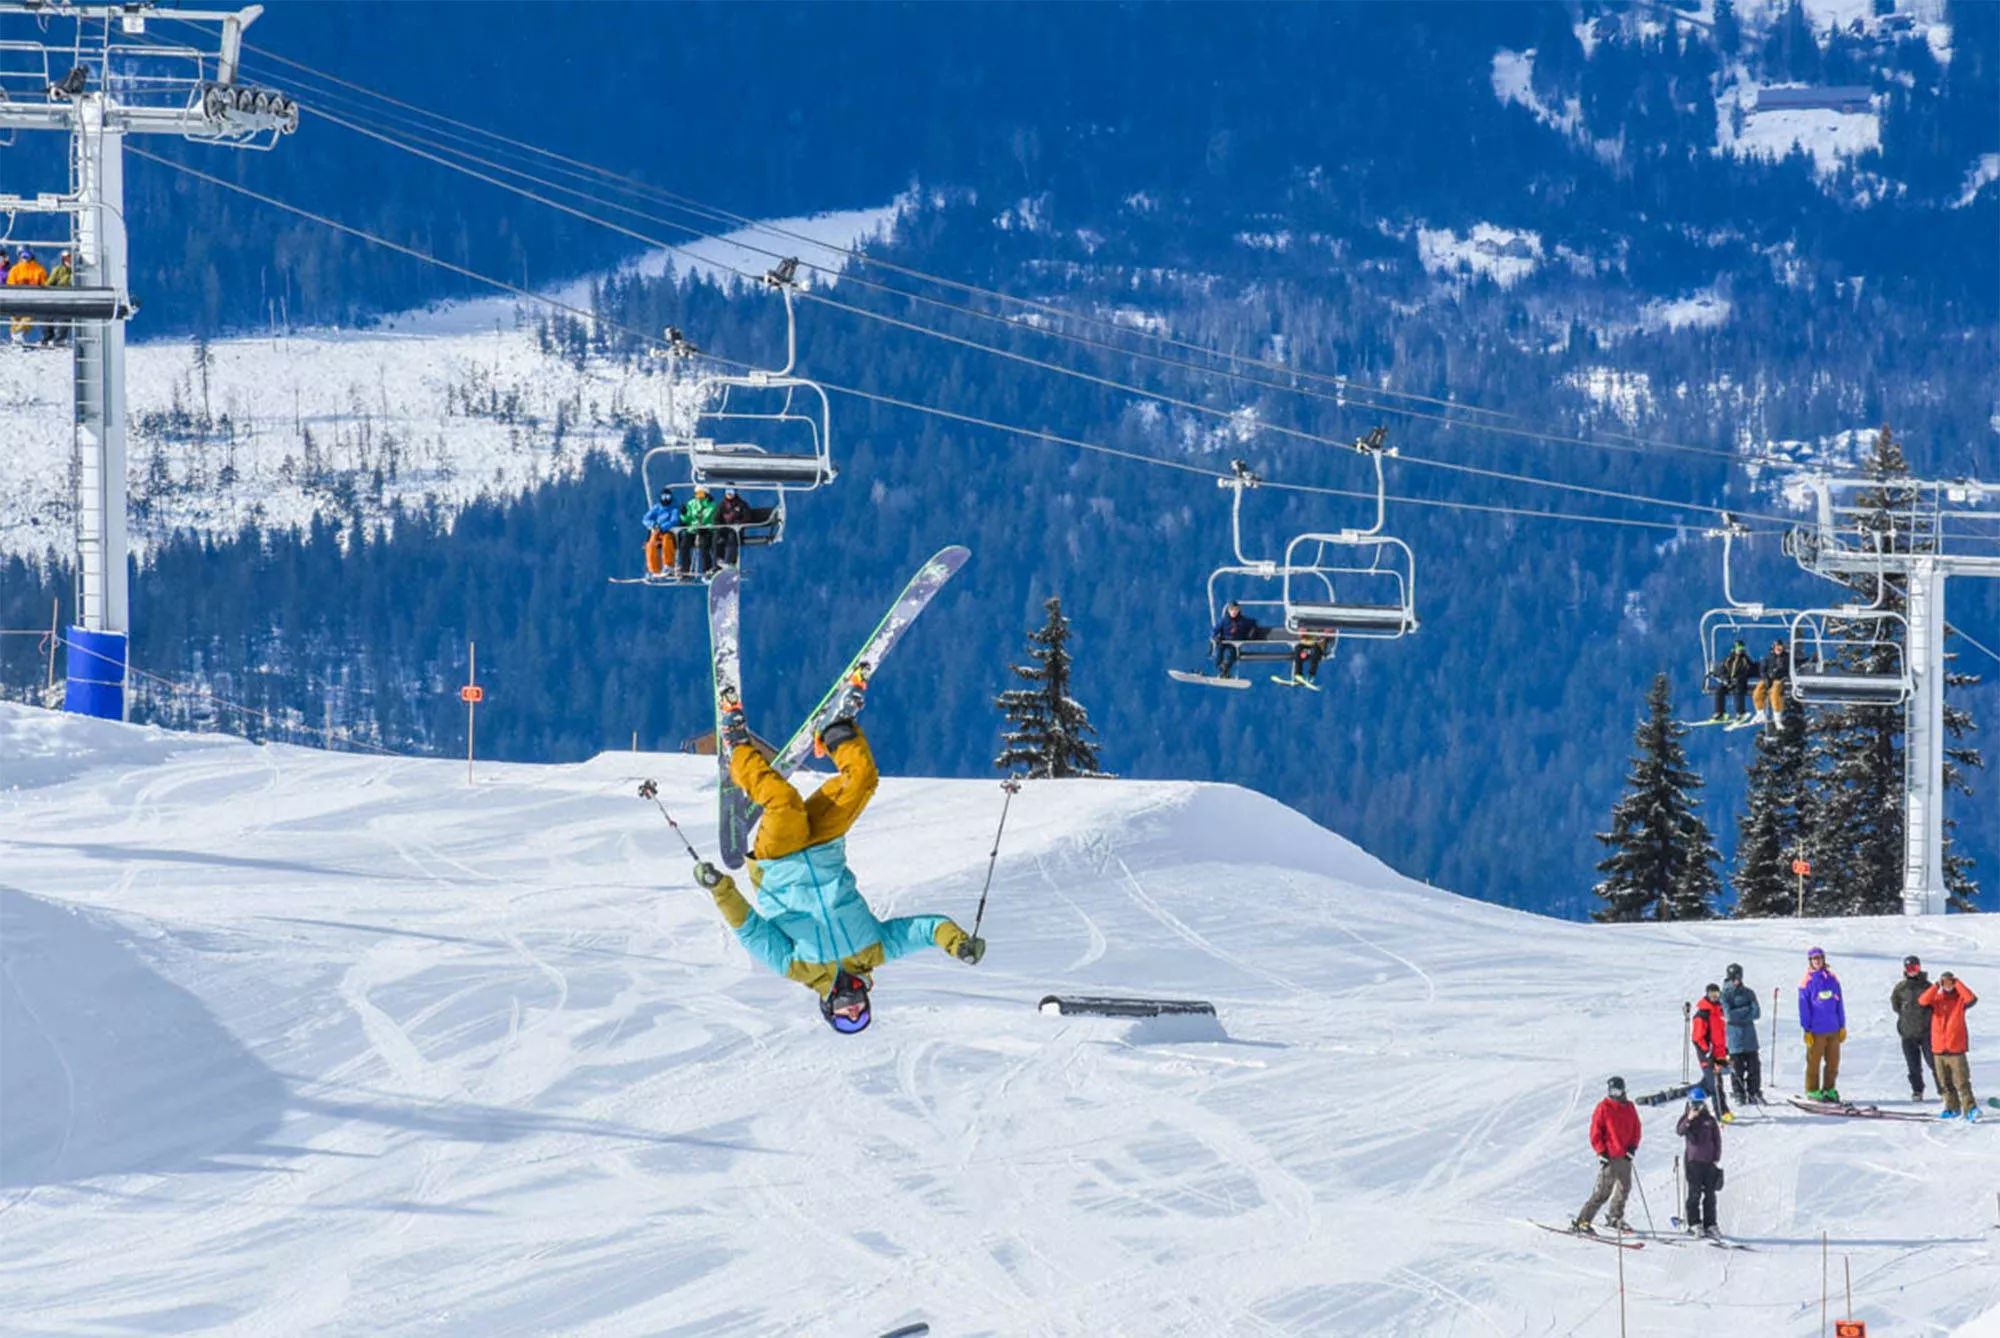 Revelstoke Mountain Equipment Rentals in Canada, North America | Snowboarding,Skiing - Rated 0.9